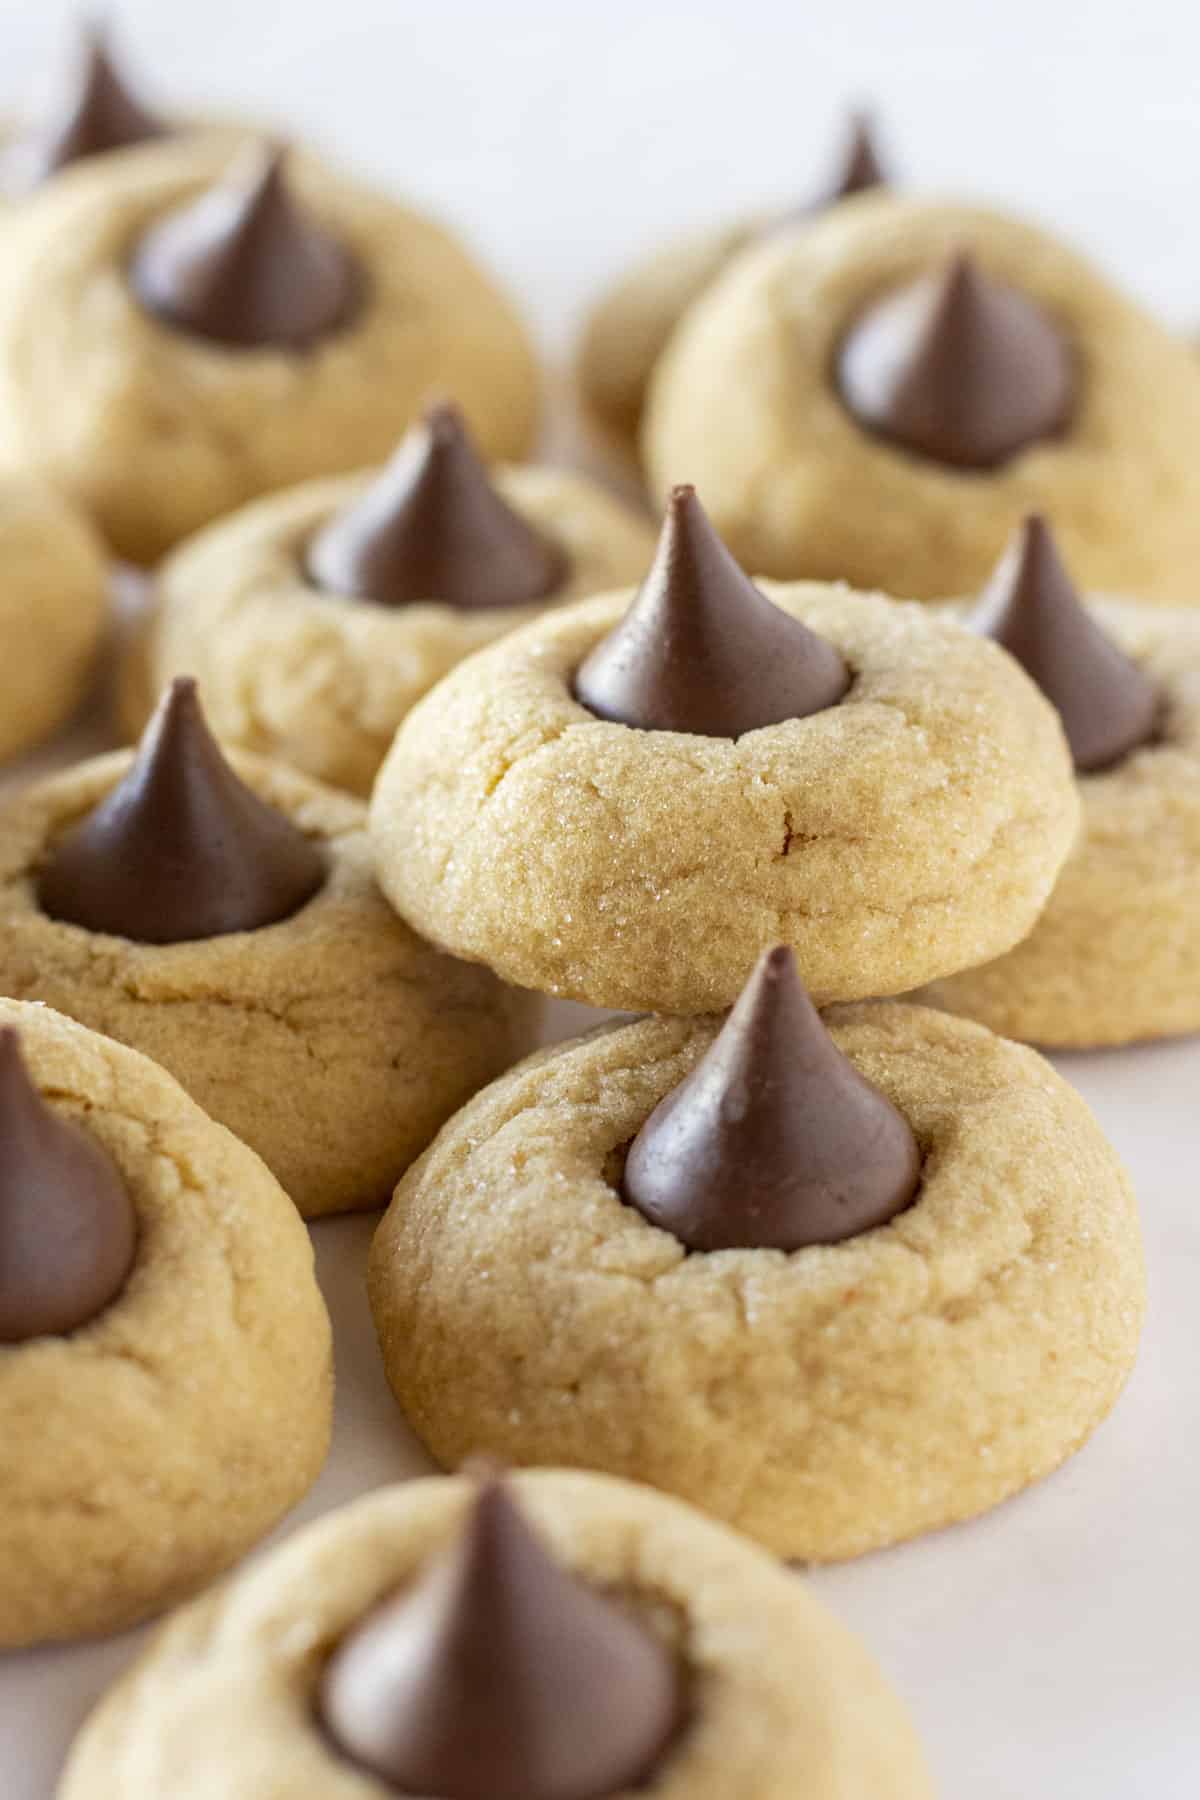 A tray full of peanut butter blossom cookies made with a cake mix.